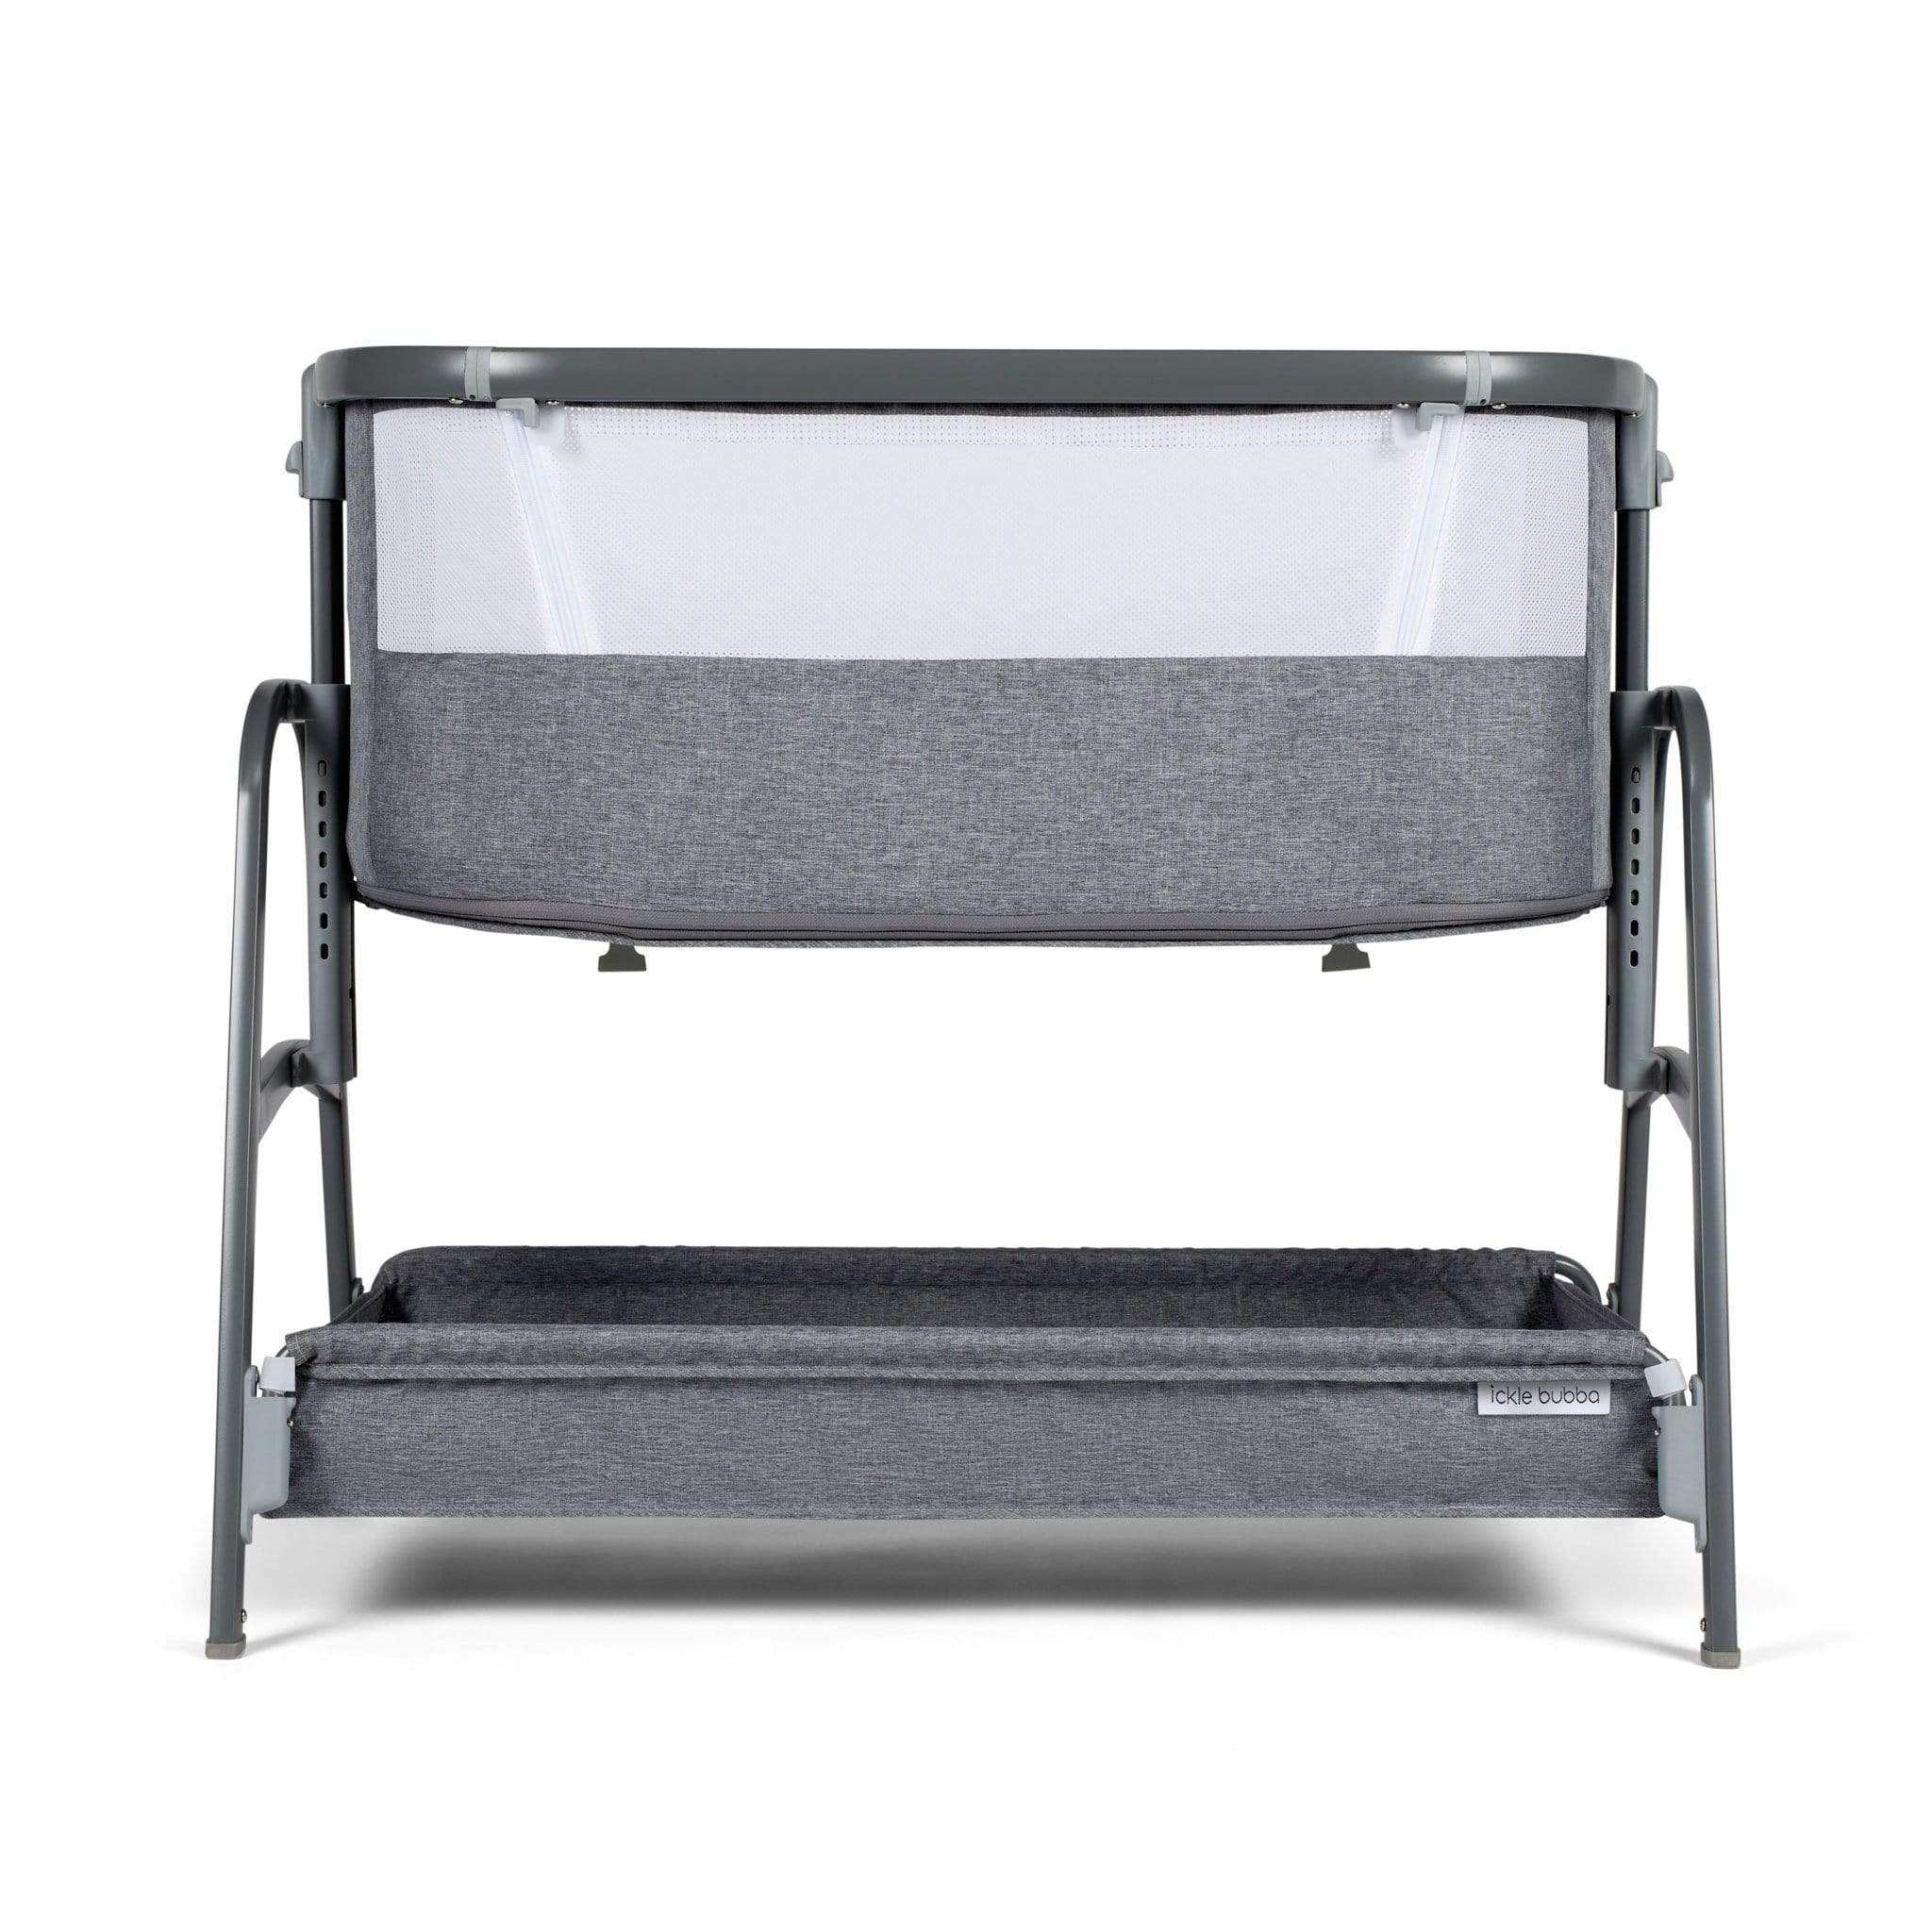 Ickle Bubba moses baskets Ickle Bubba Bubba&Me Bedside Crib Space Grey 40-001-000-860